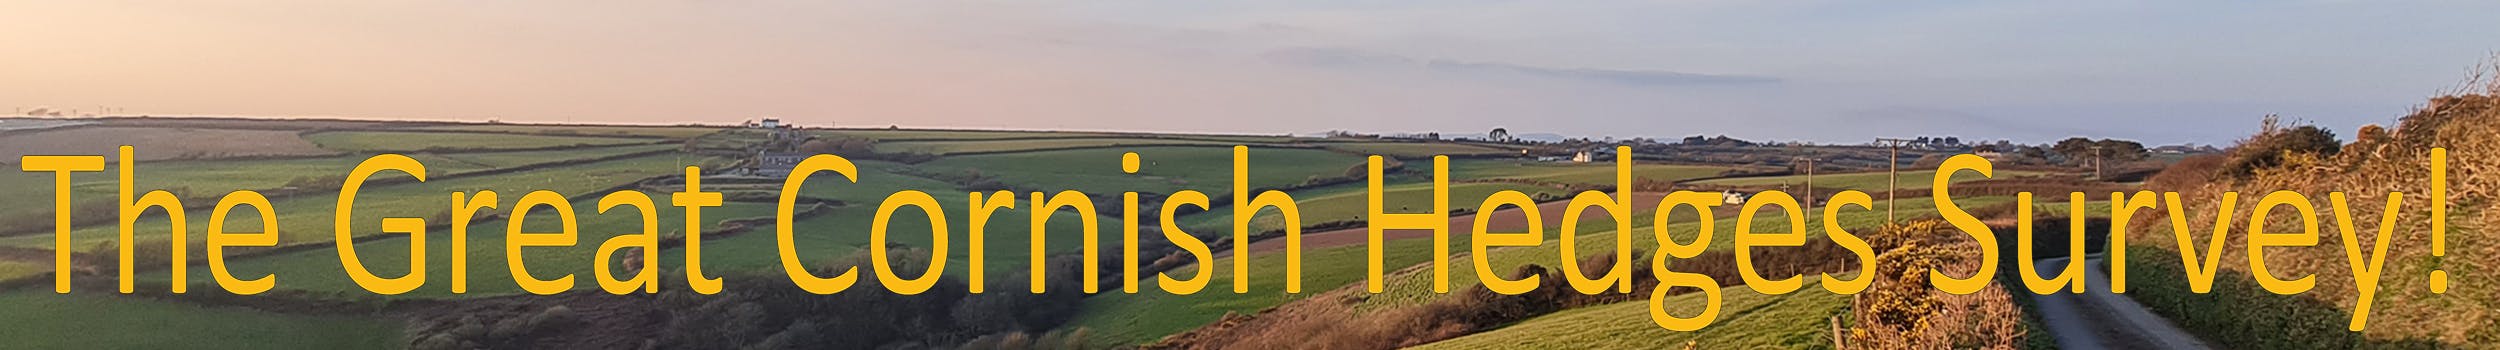 Image shows Cornish Hedges in a landscape with 'The Great Cornish Hedges Survey!' written across in Yellow